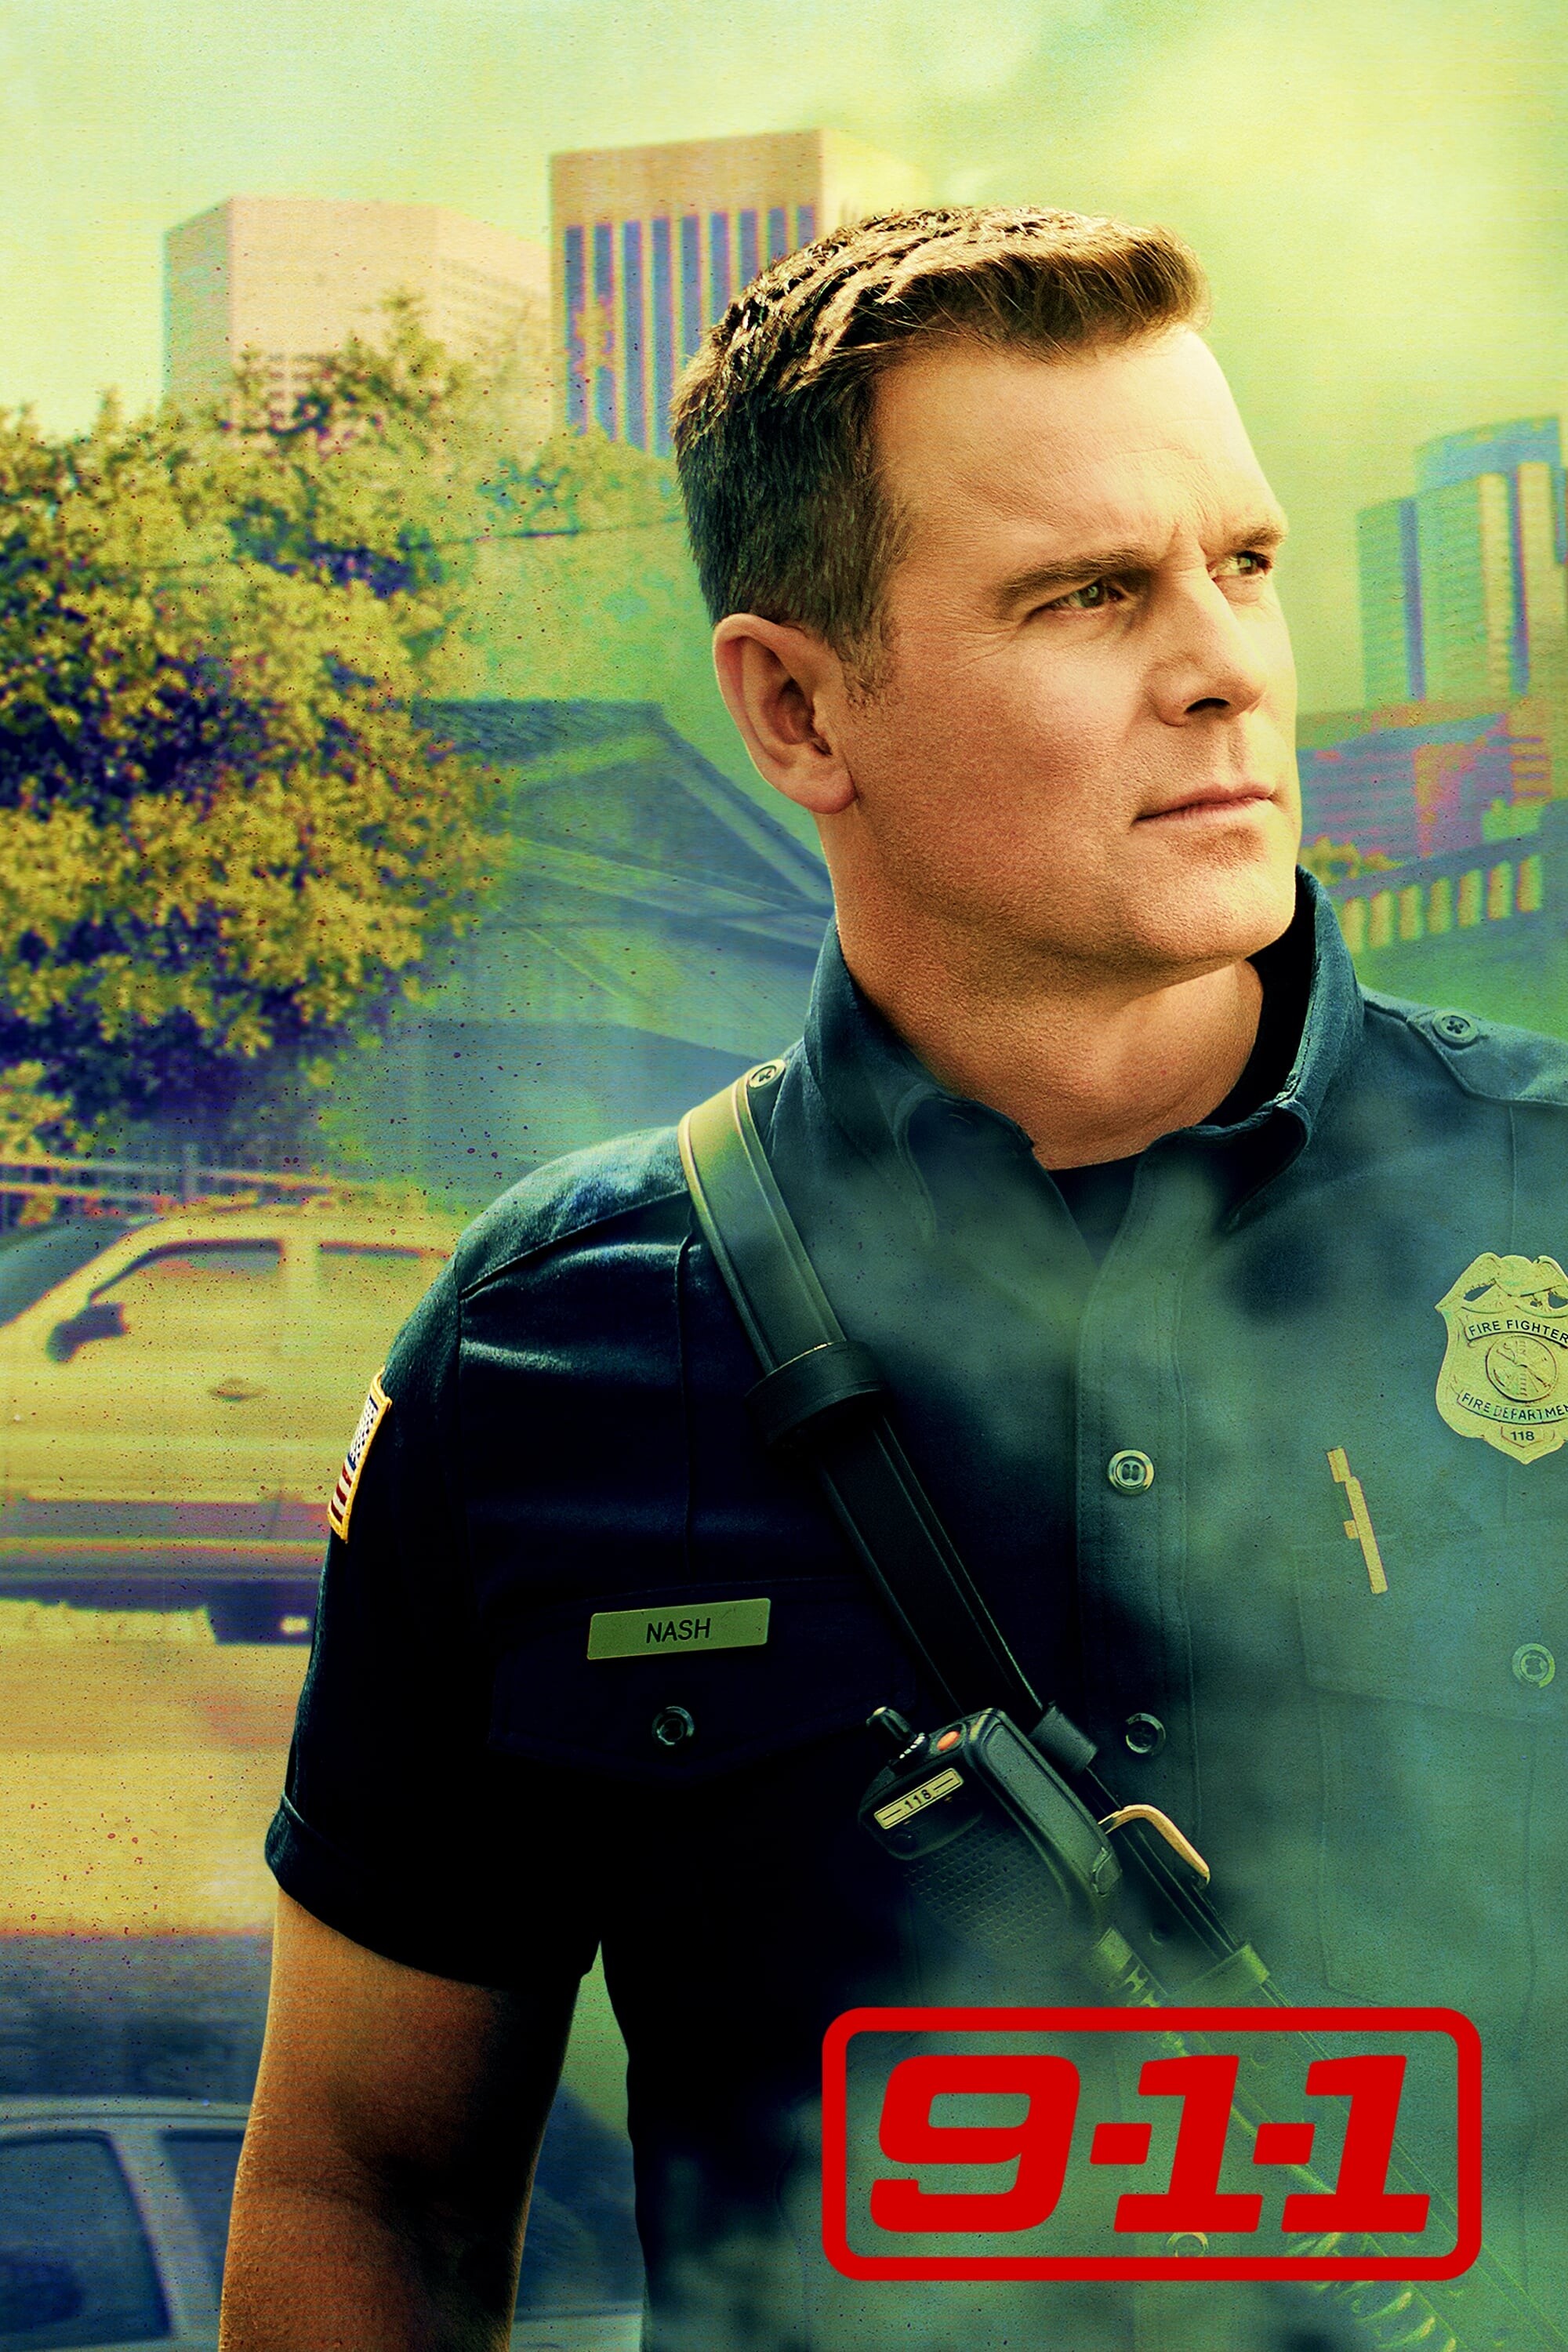 9-1-1 (TV Series): Robert "Bobby" Nash, LAFD Station 118 Captain, Peter Krause, Firefighters' Team. 2000x3000 HD Background.